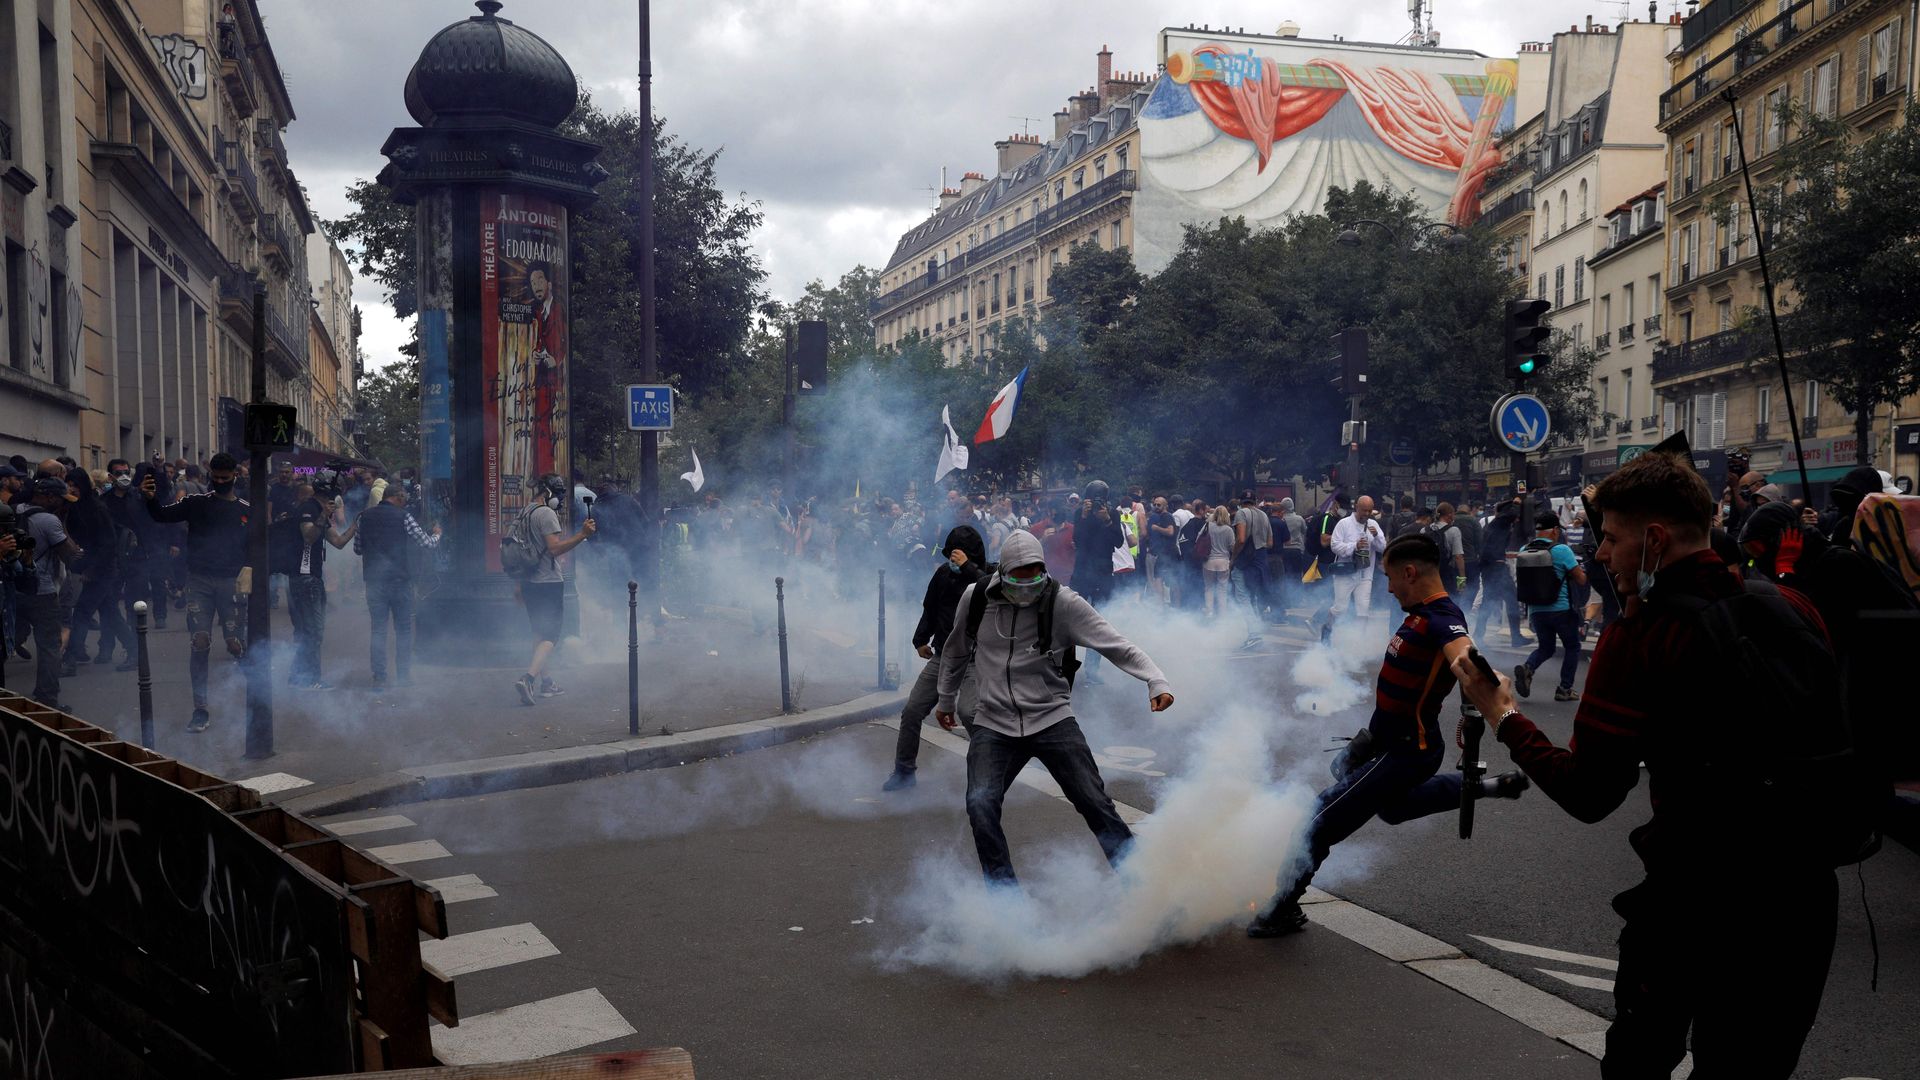 A protester kicks a smoking teargas shell during a demonstration in Paris on July 31 against new pandemic measures